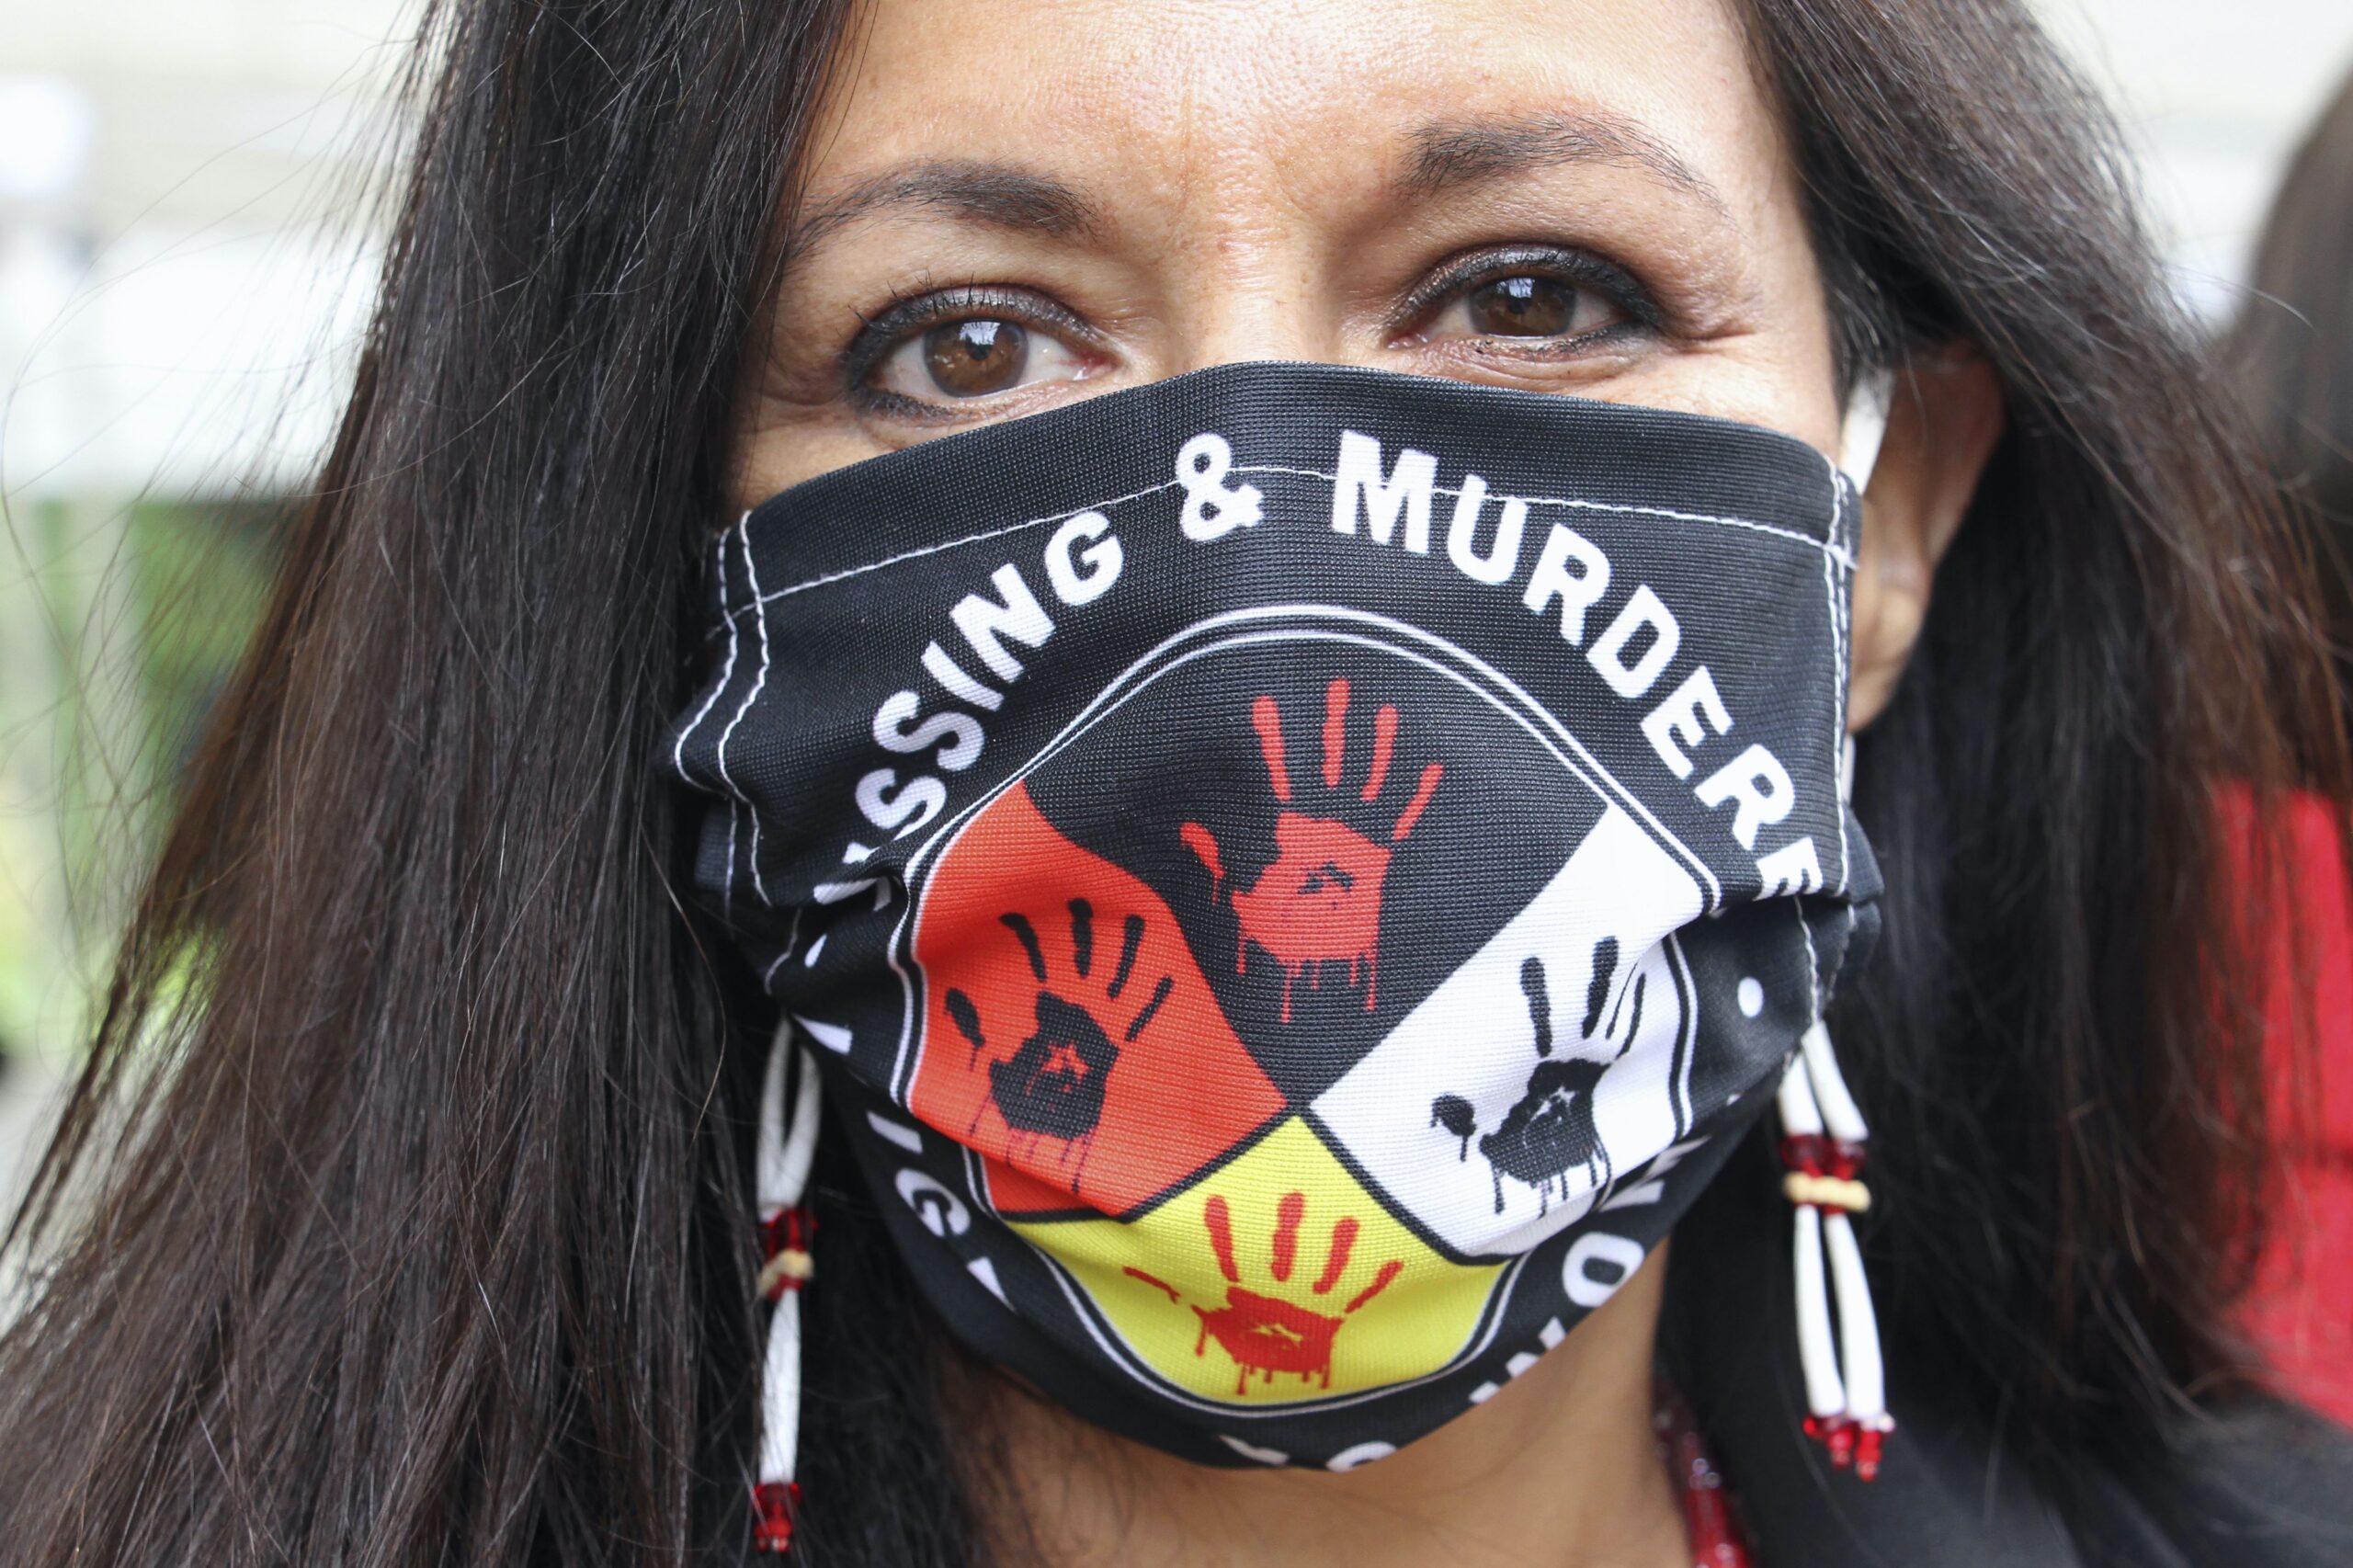 Missing and Murdered Indigenous Women mask